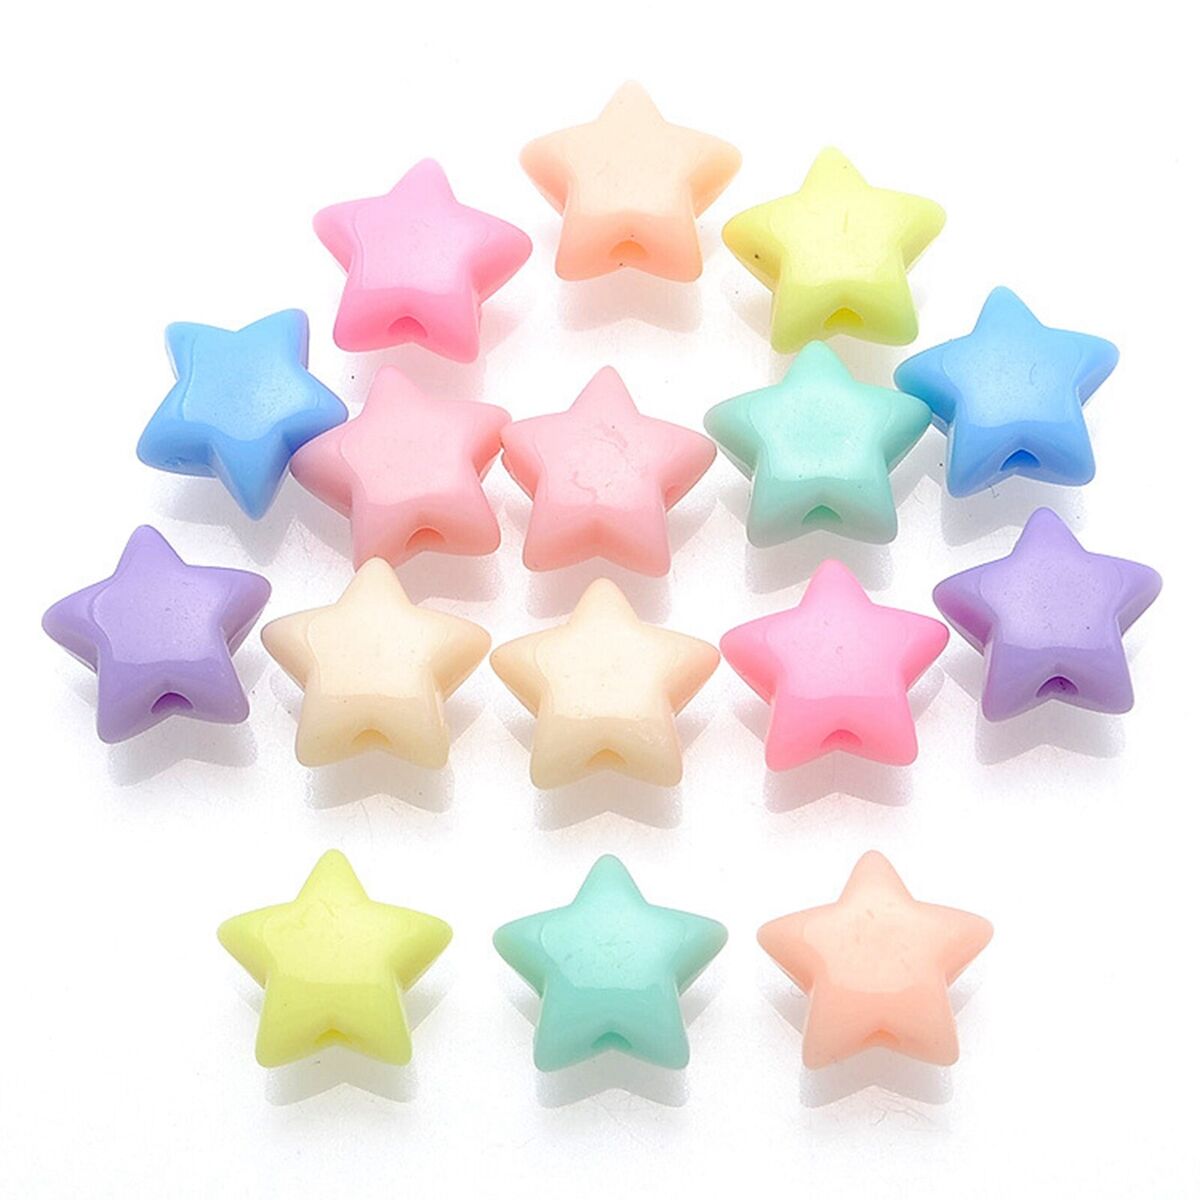 100 Mixed Pastel Color Acrylic Star Beads Charms 14mm Jewelry